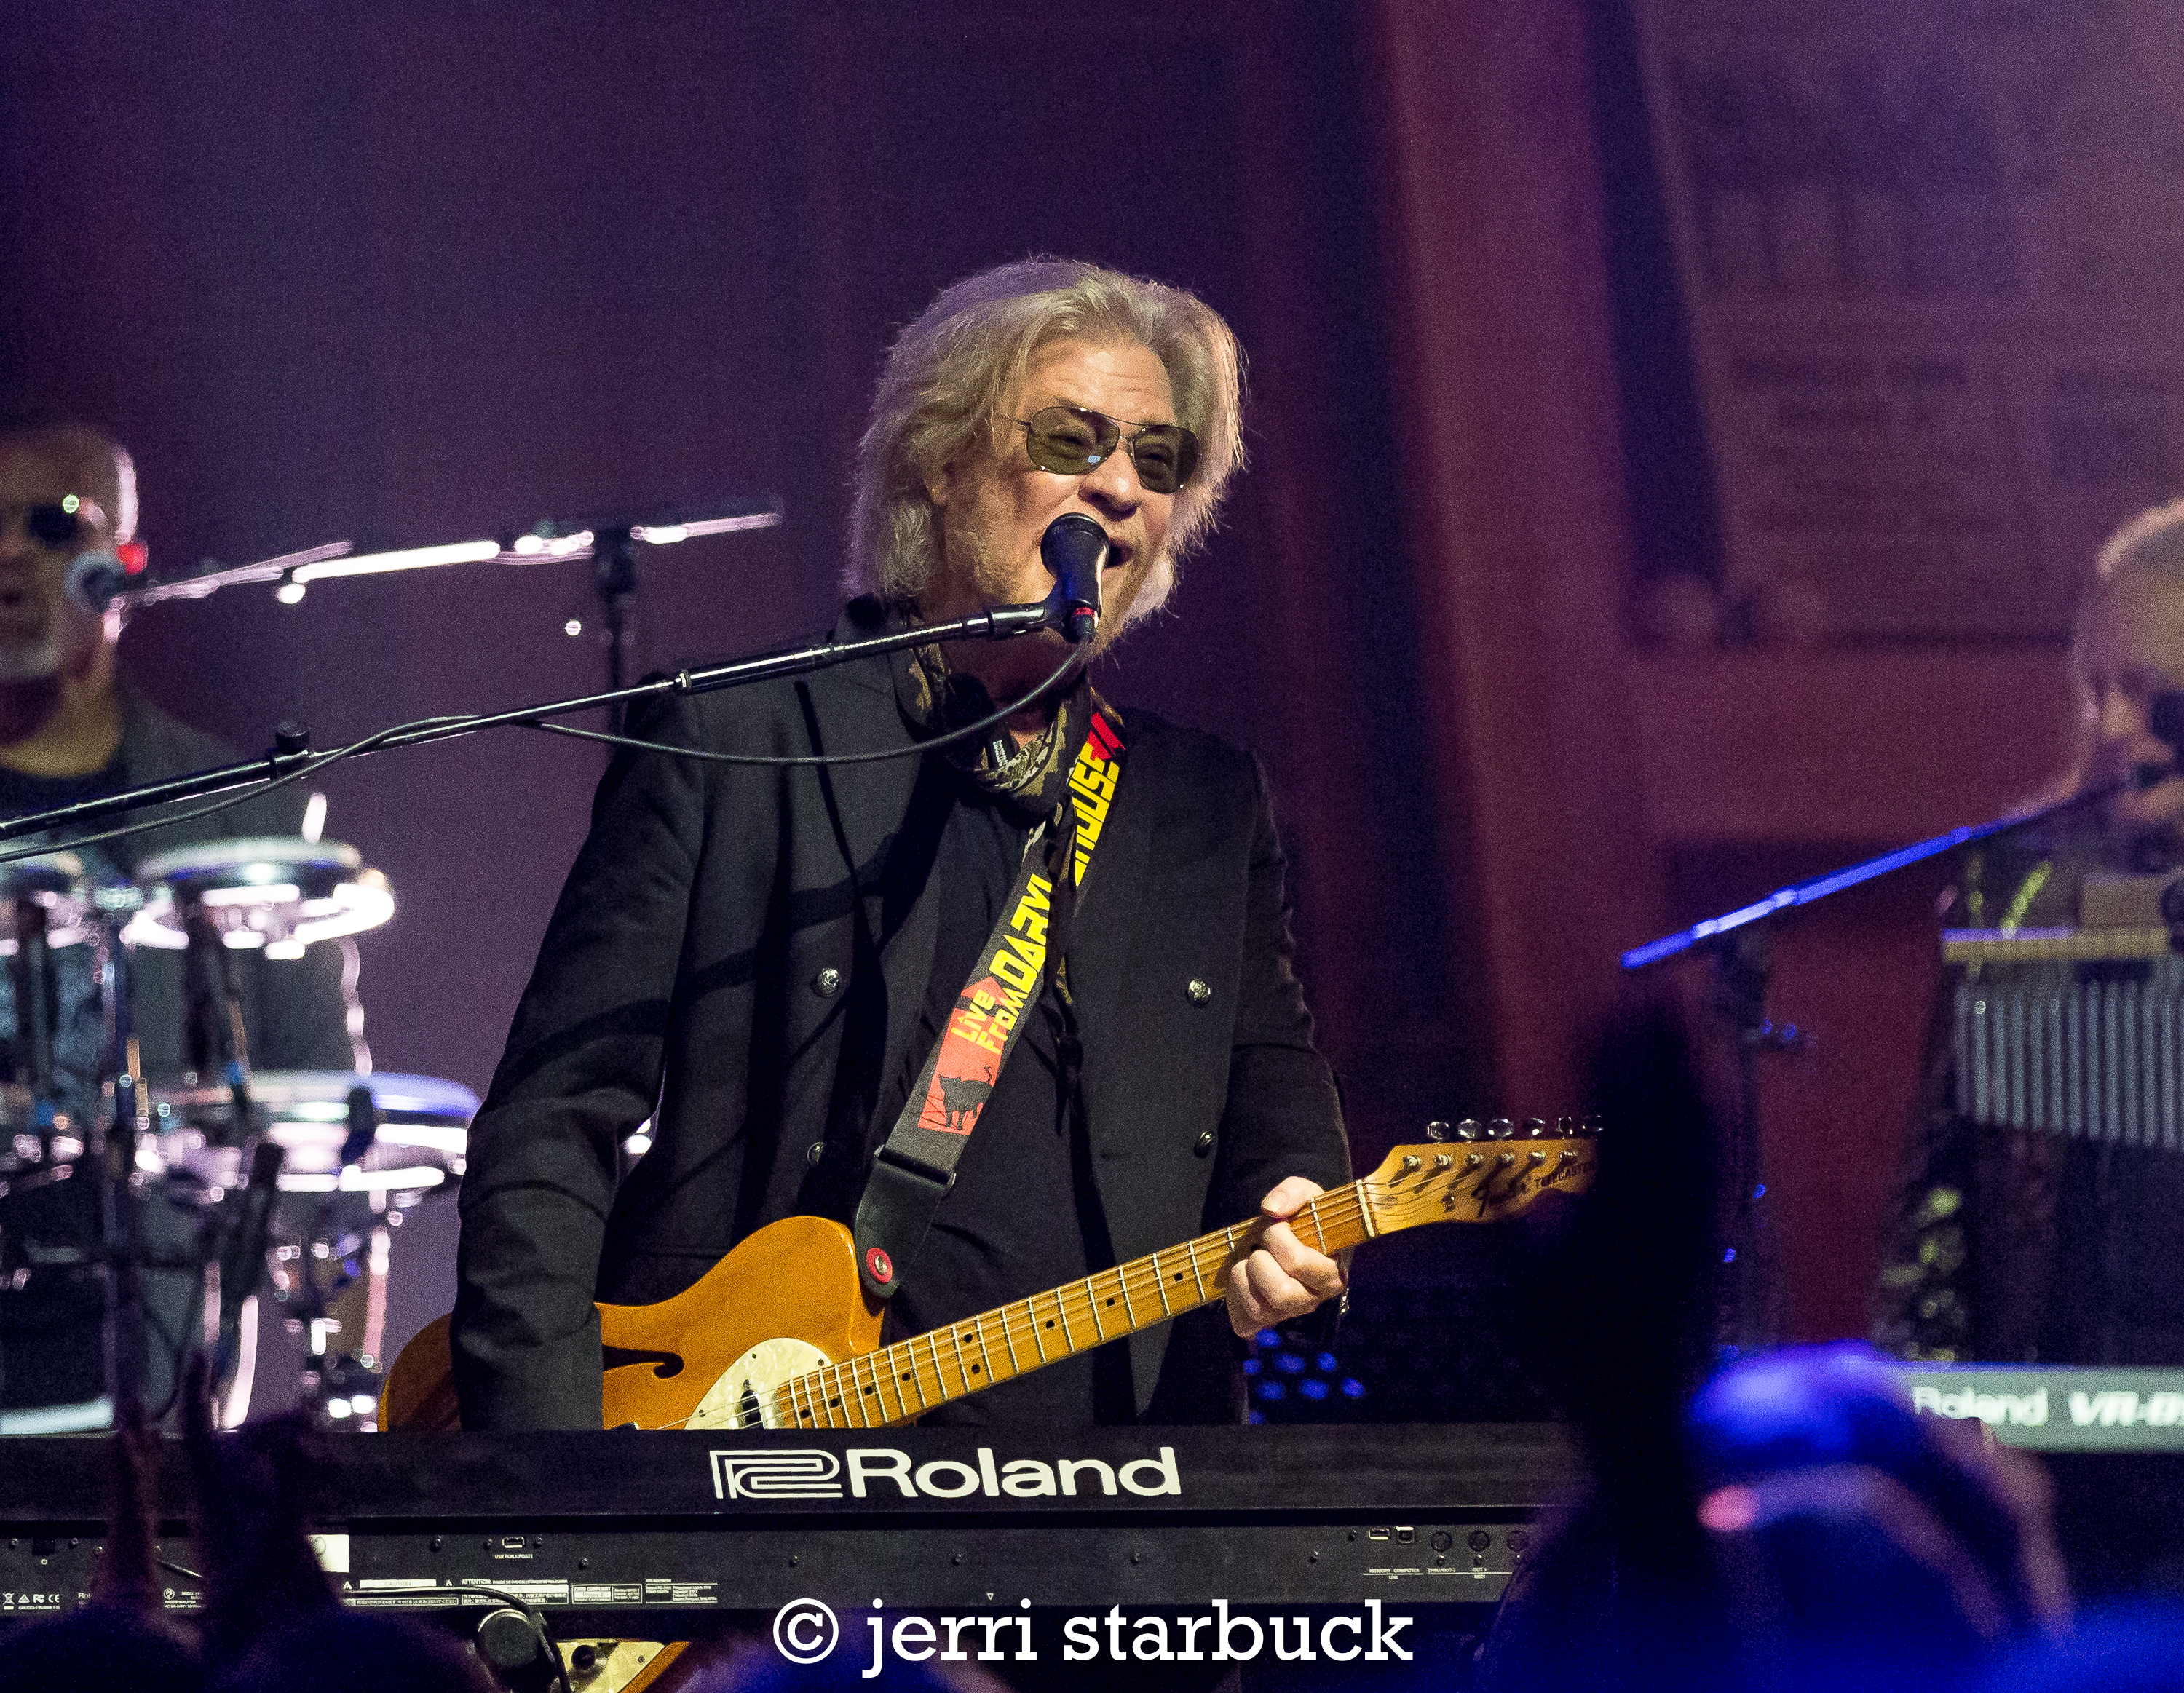 Concert Photos: Daryl Hall with Todd Rundgren at ACL Live